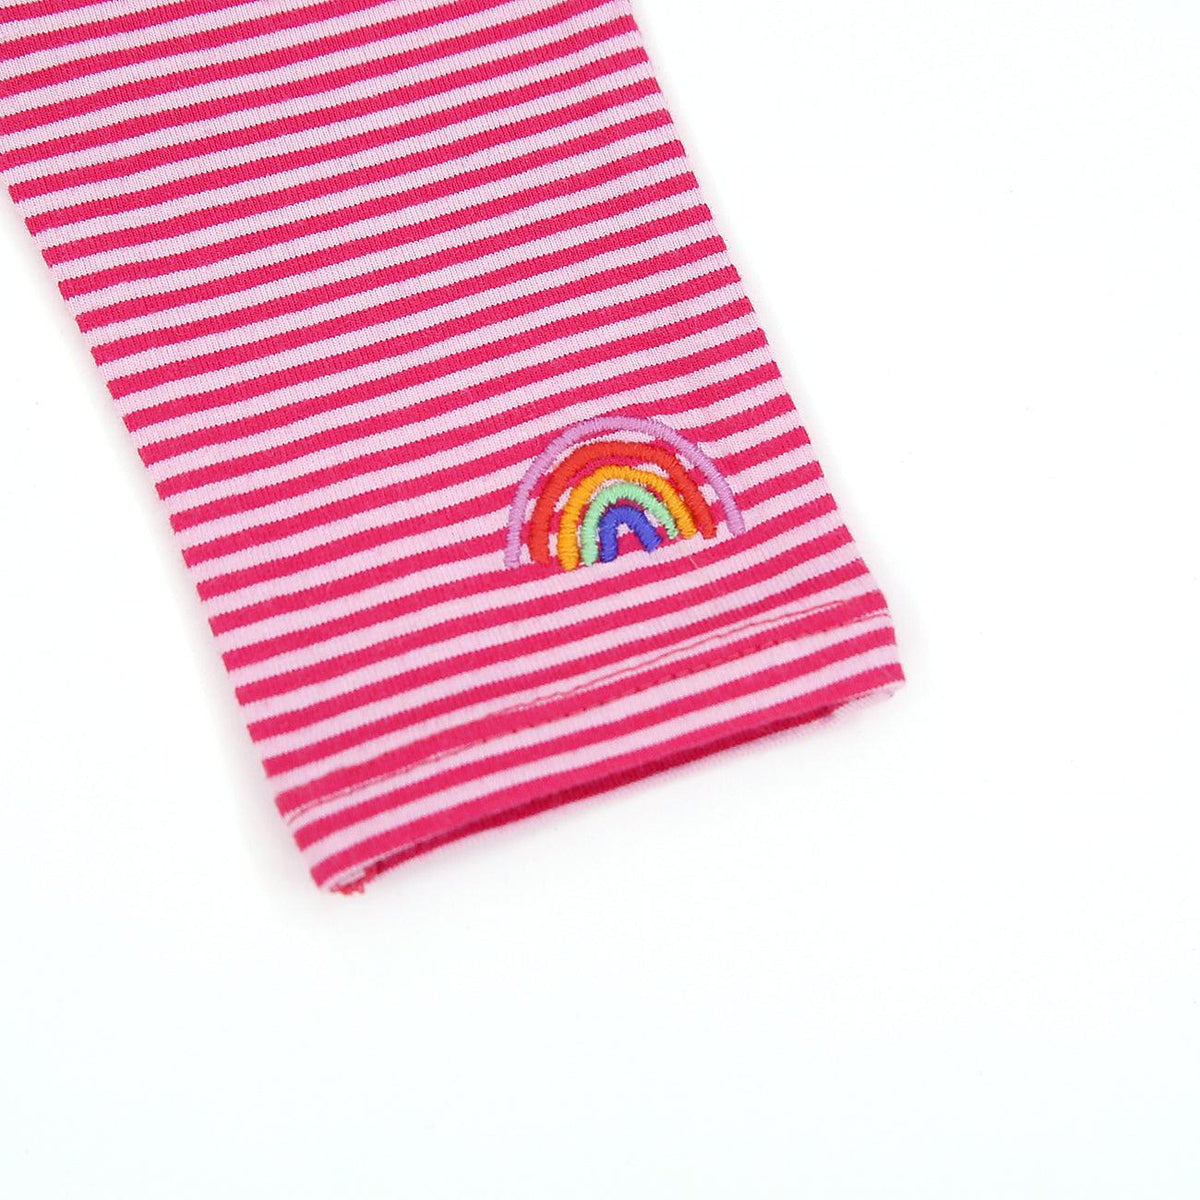 Imported Striped Printed Soft Cotton Legging For Girls 1 MONTH - 2-3 YRS (LE-11624) - Brands River